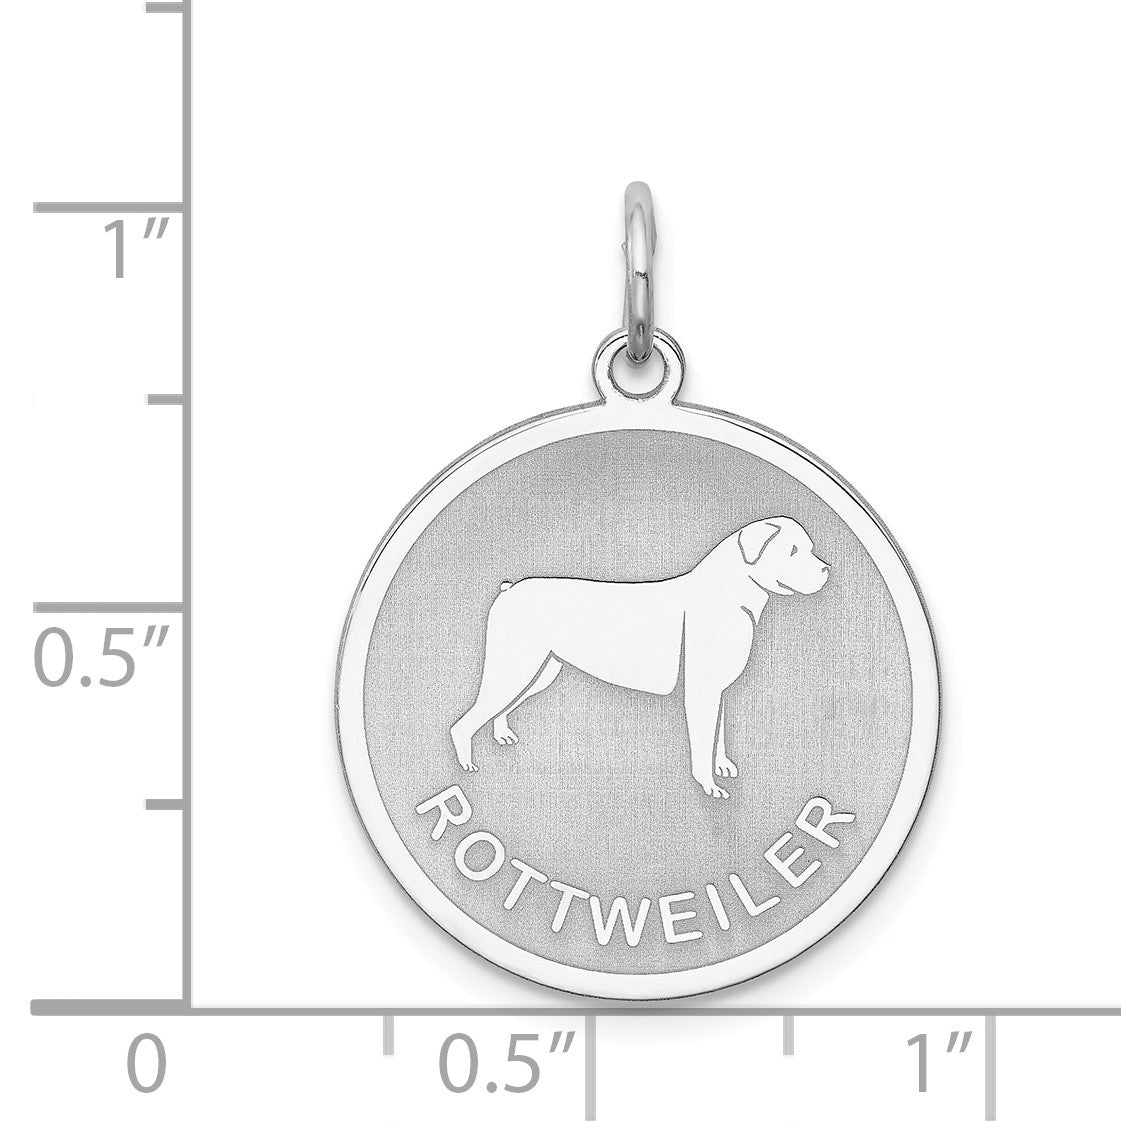 Alternate view of the Sterling Silver Laser Etched Rottweiler Dog Pendant, 19mm by The Black Bow Jewelry Co.